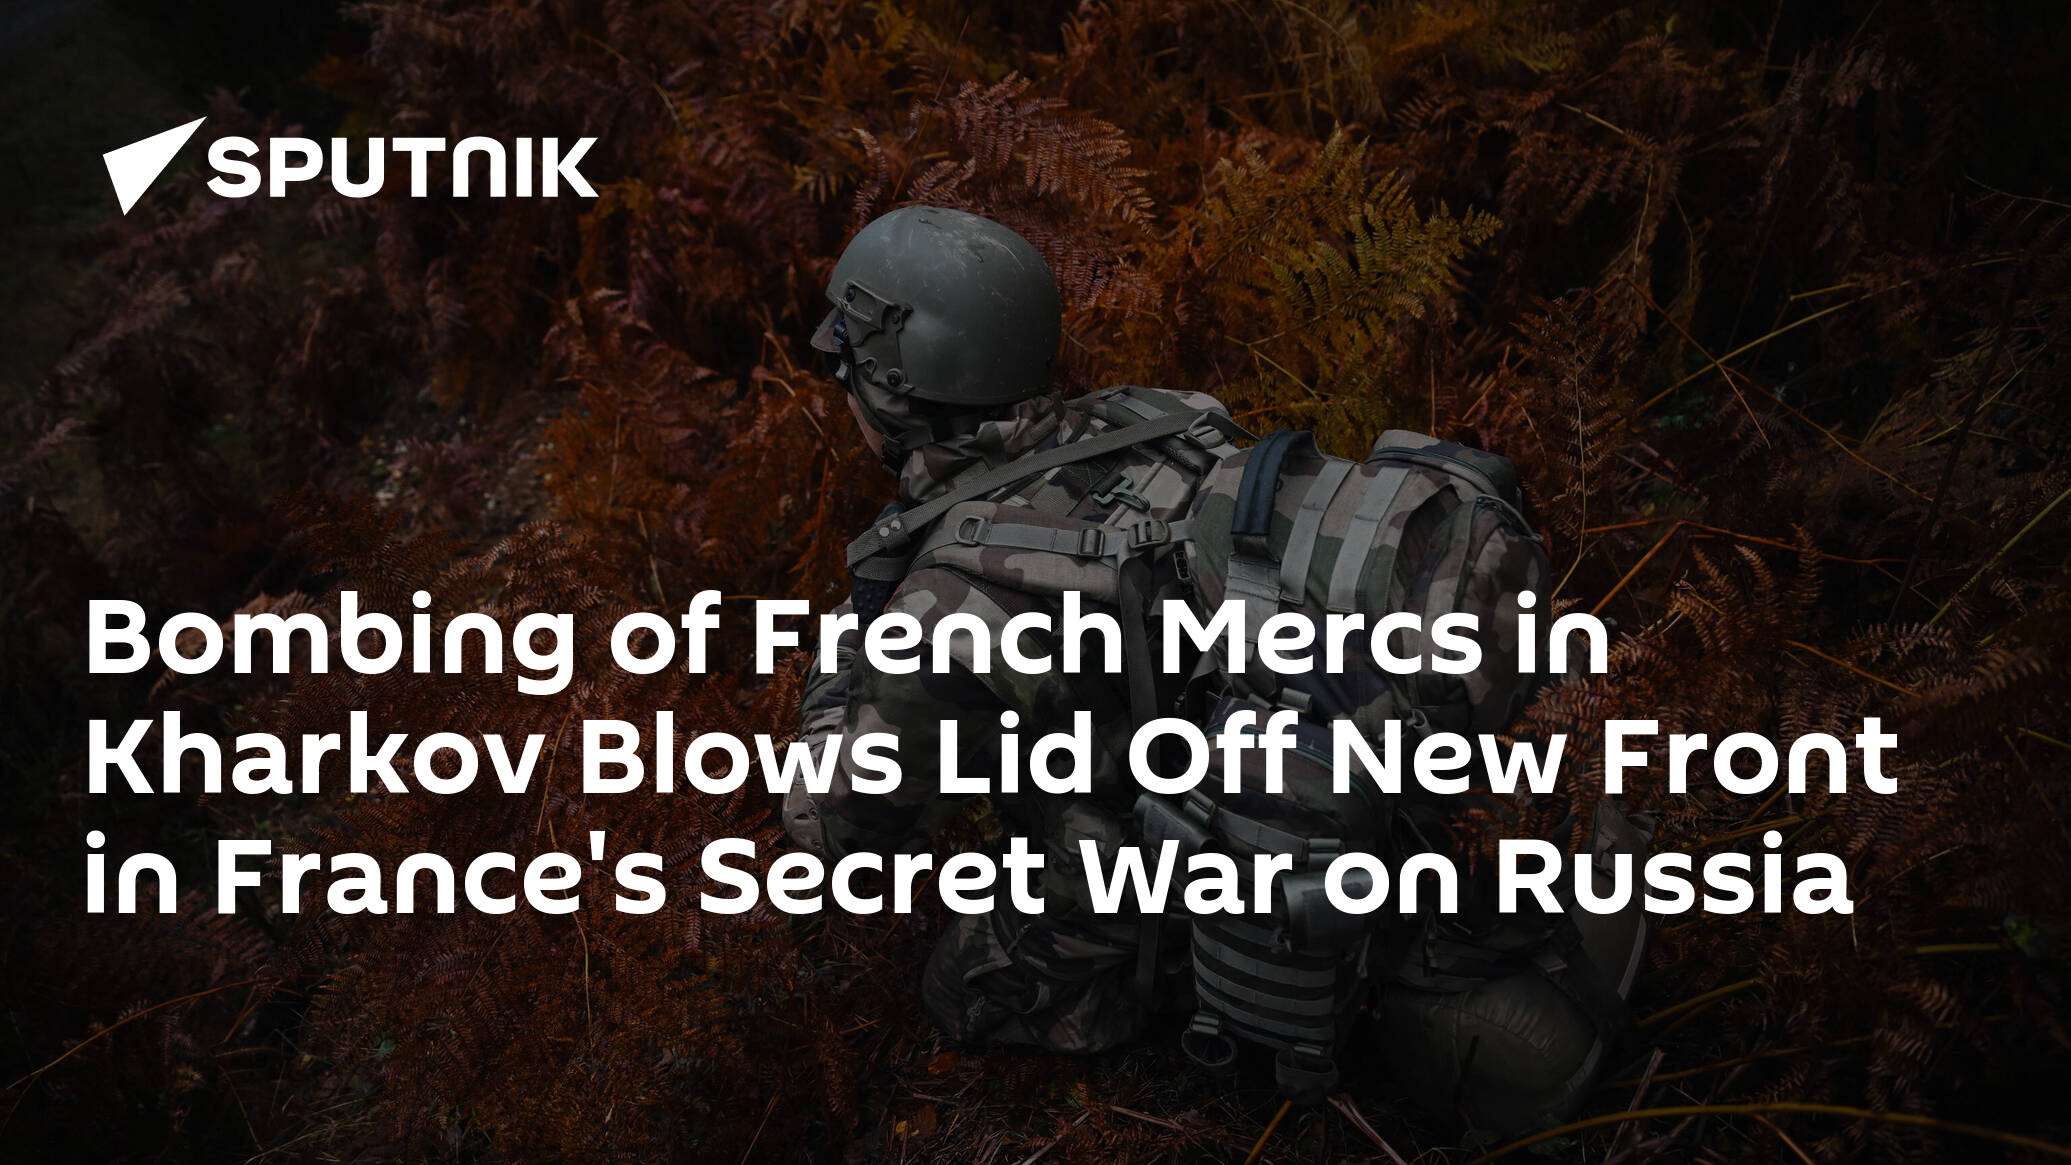 Bombing of French Mercs in Kharkov Blows Lid Off New Front in France's Secret War on Russia